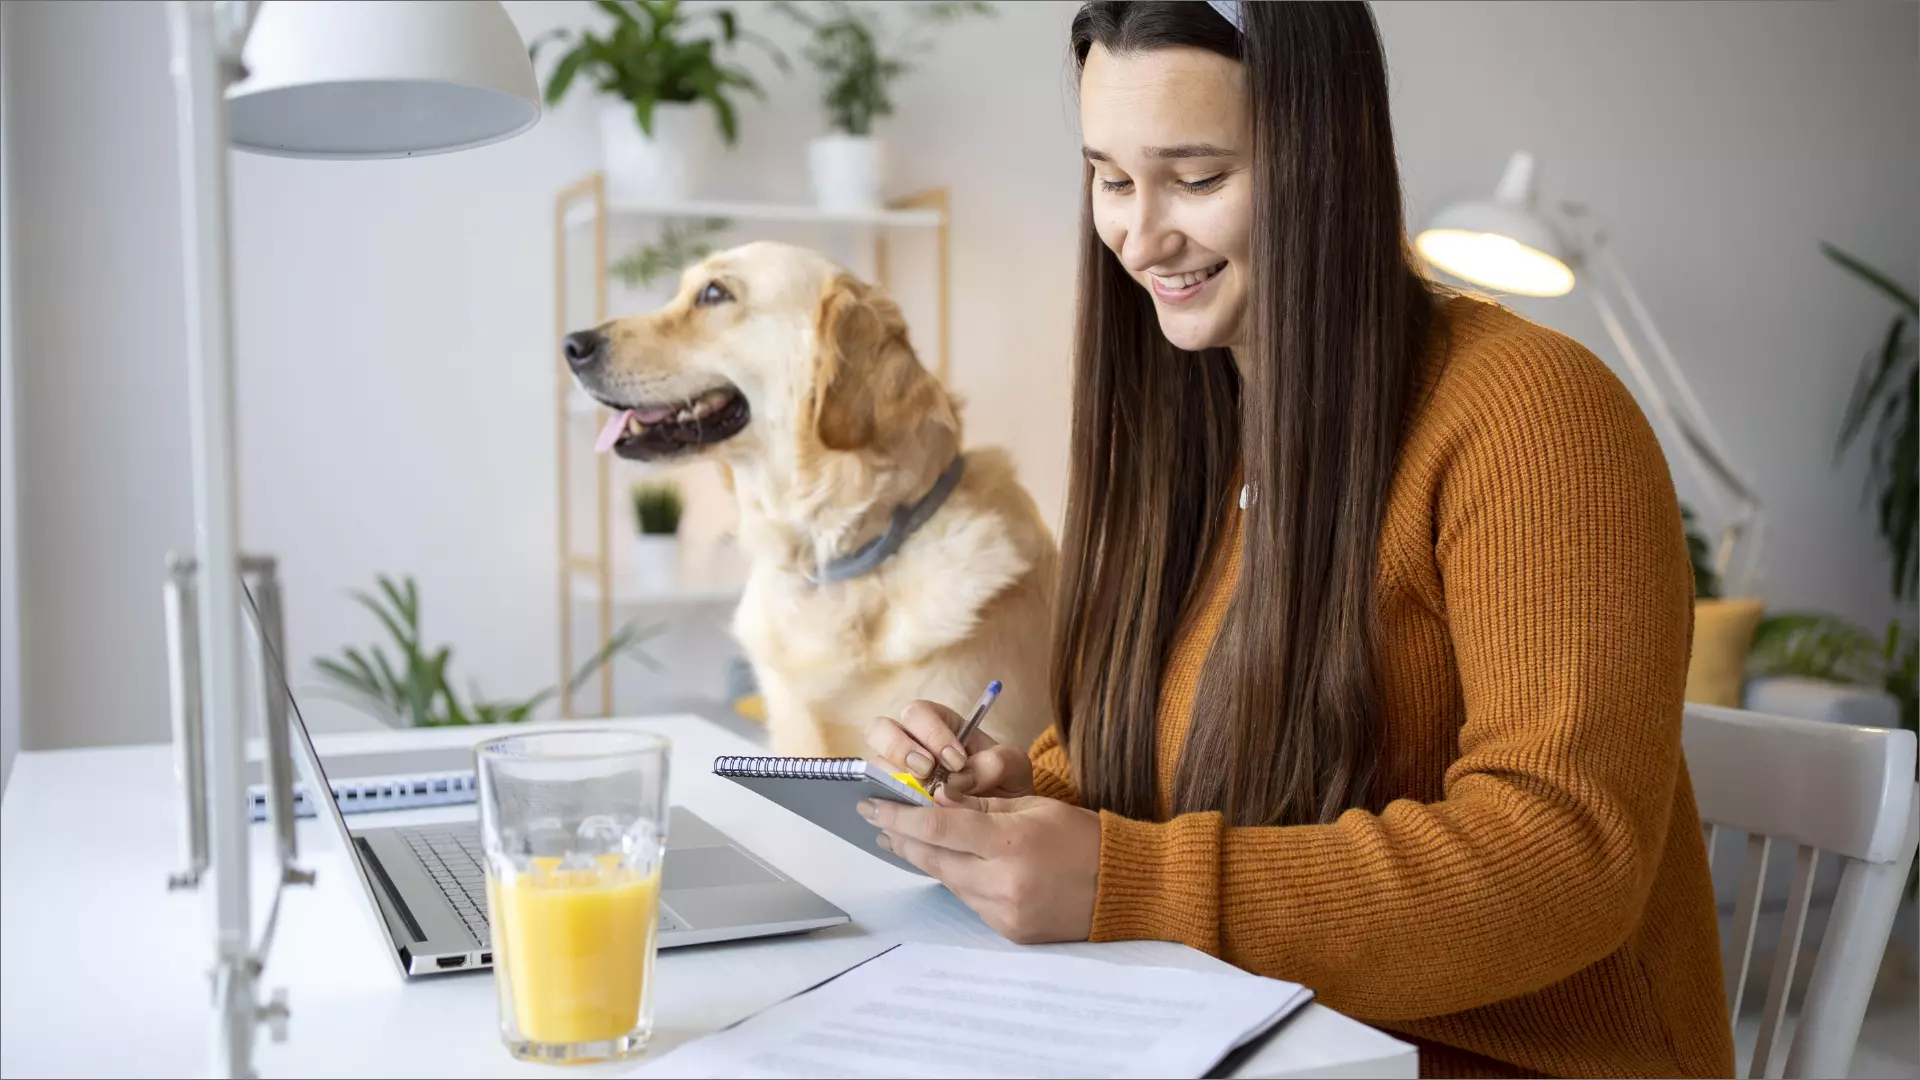 Explore Marketing Strategies To Launch A Pet Business